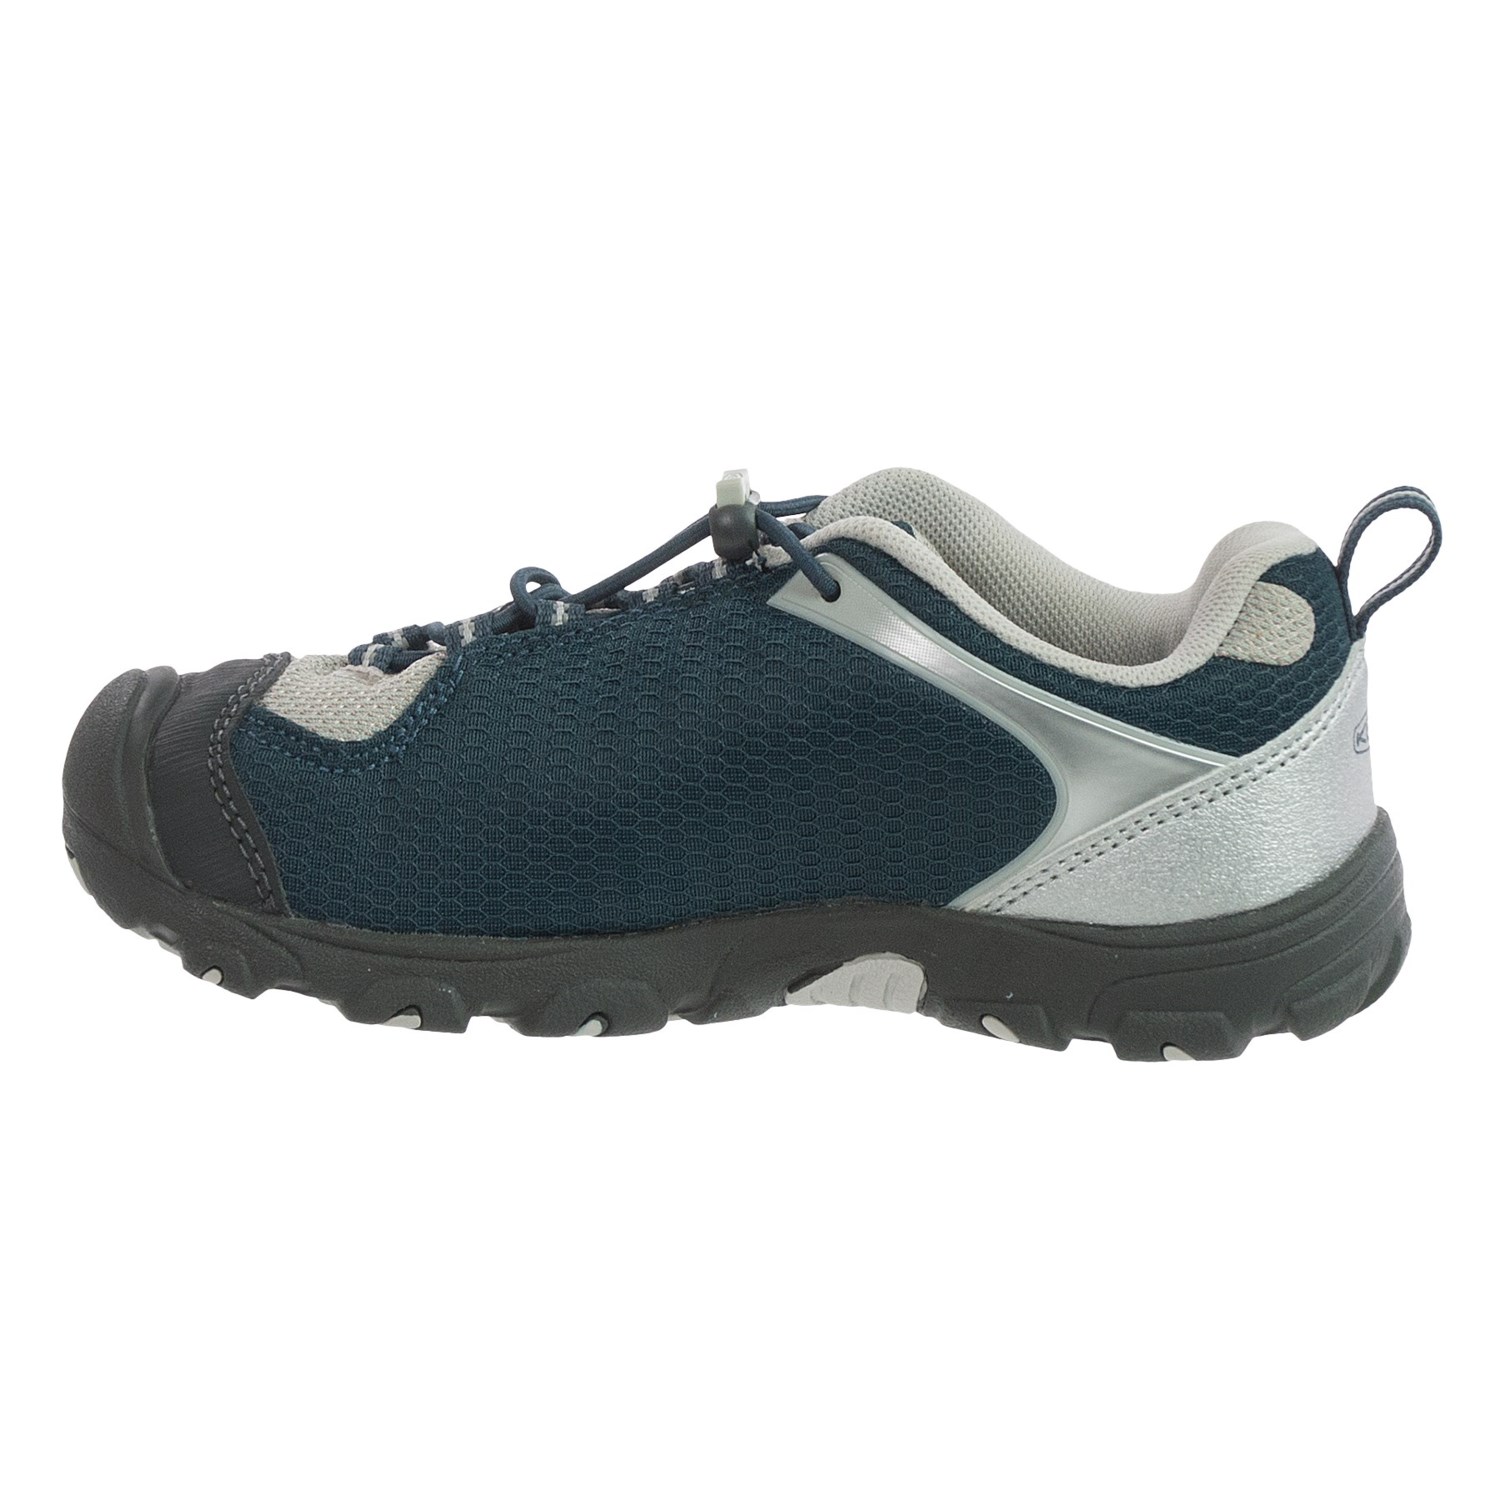 Keen Jamison Shoes (For Big Kids) 107WN - Save 40%